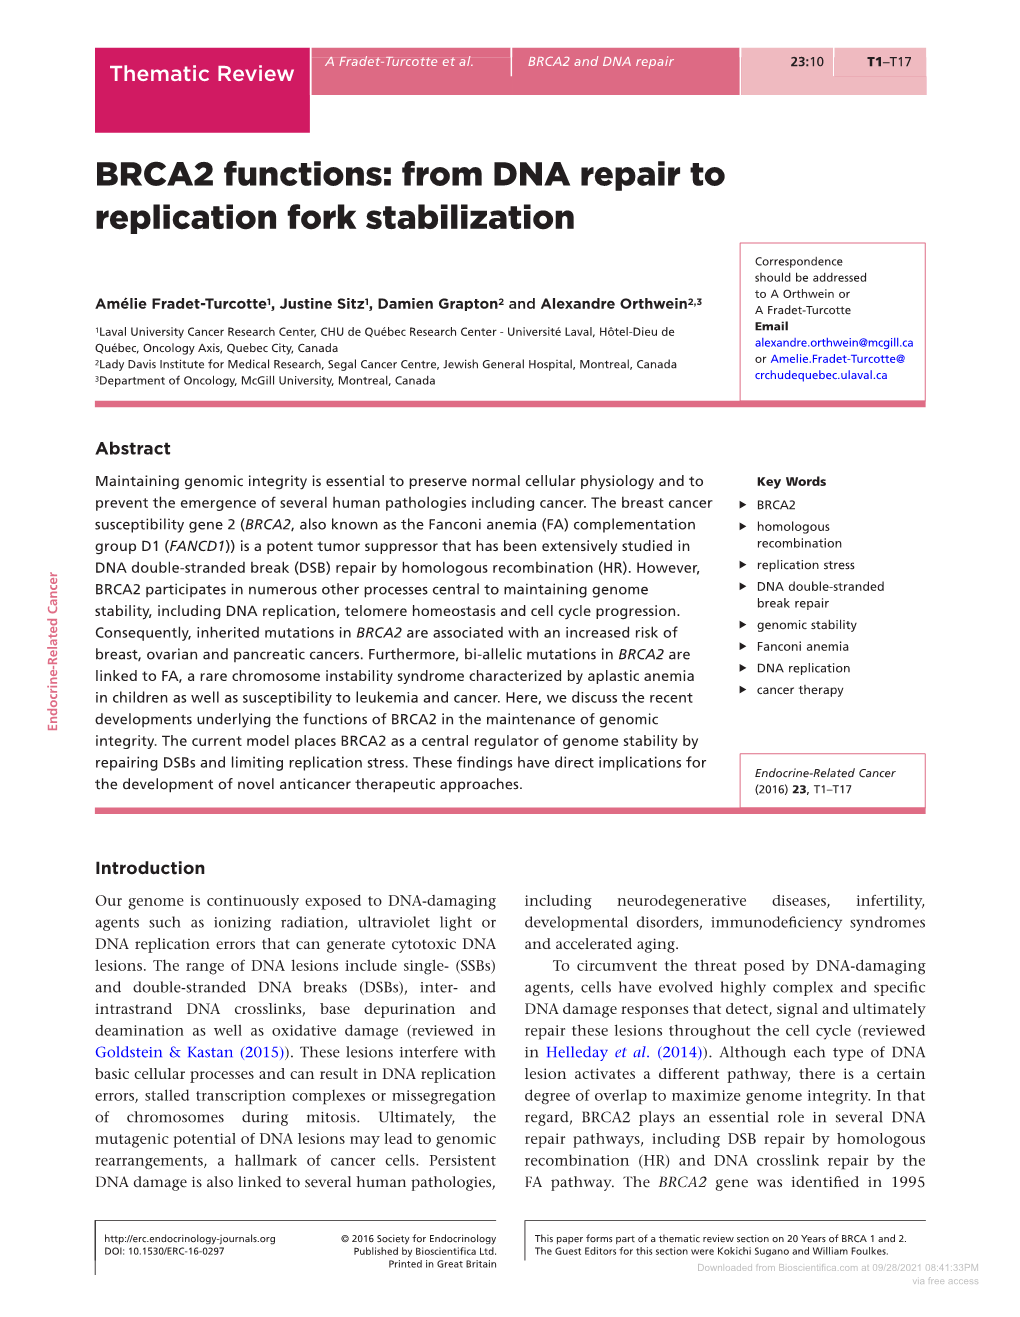 BRCA2 Functions: from DNA Repair to Replication Fork Stabilization